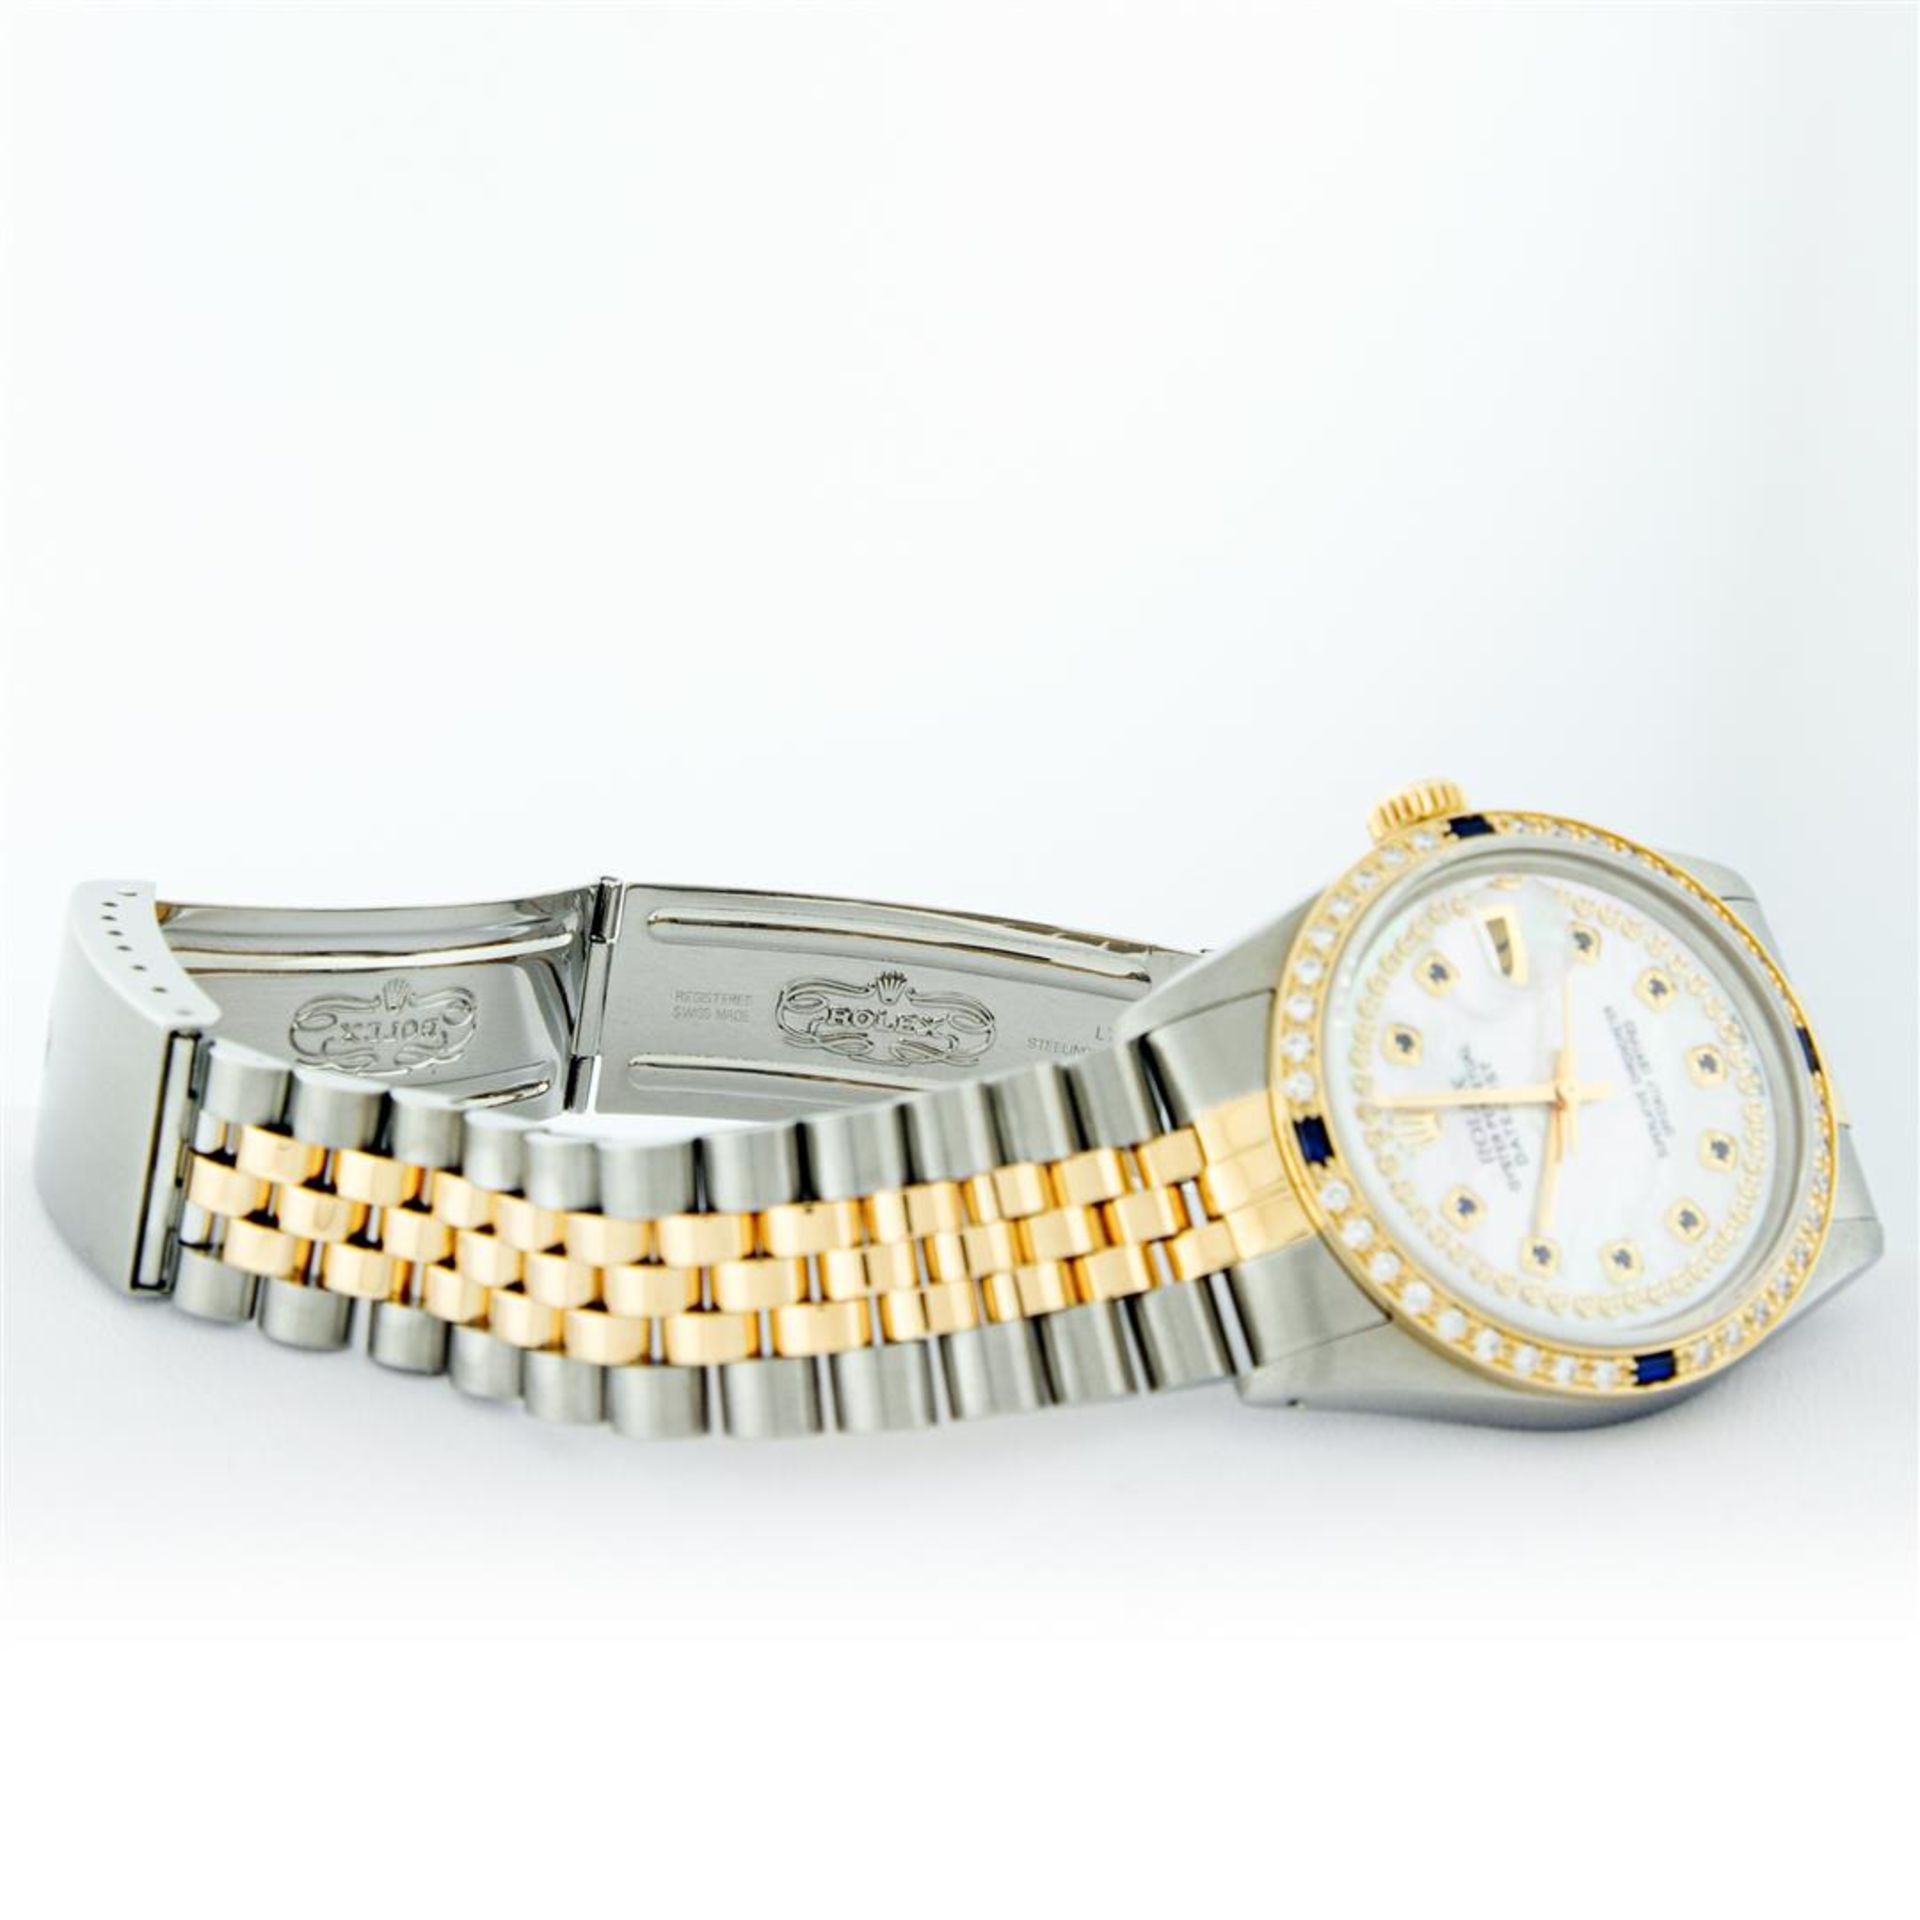 Rolex Mens 2 Tone Mother Of Pearl Diamond & Sapphire Datejust Wristwatch - Image 8 of 9